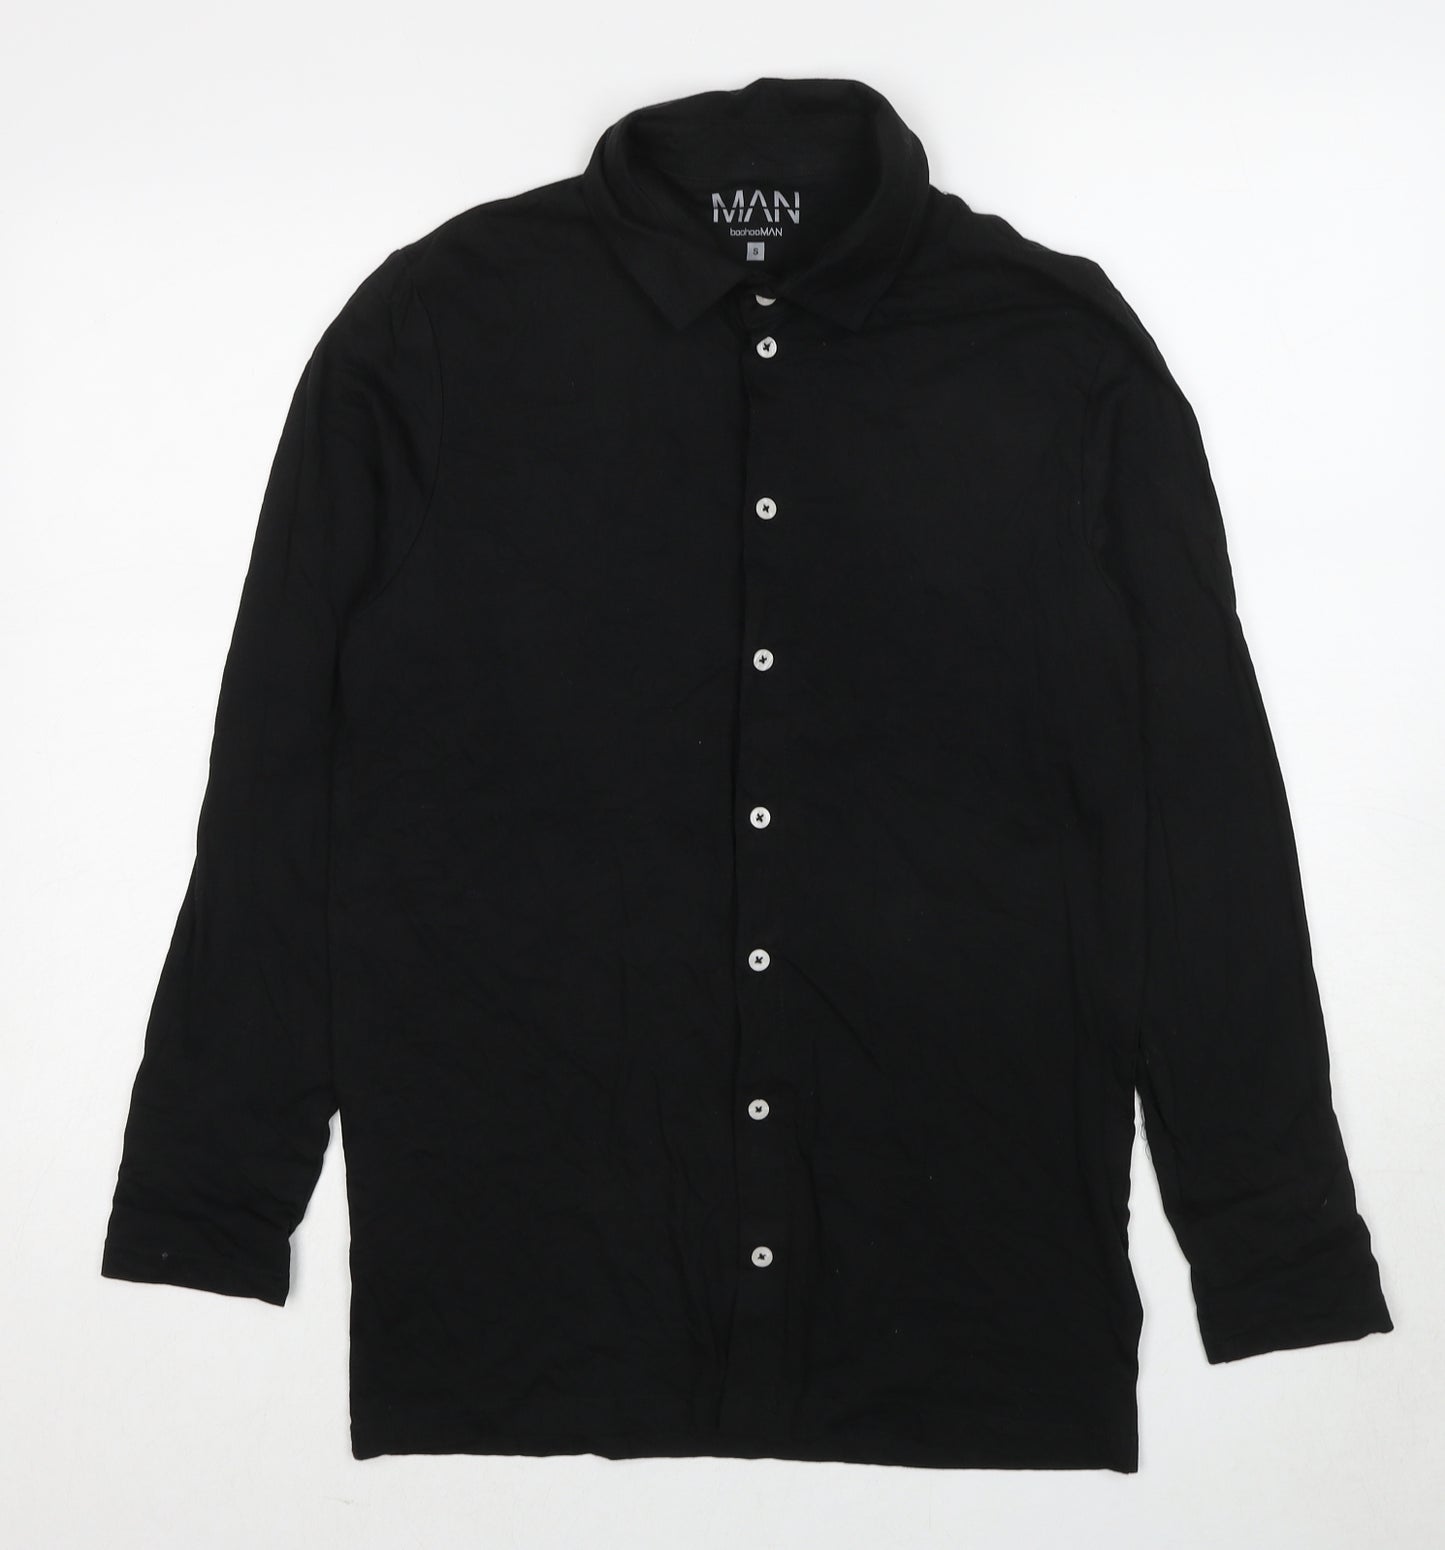 Boohoo Mens Black Cotton Button-Up Size S Collared Button